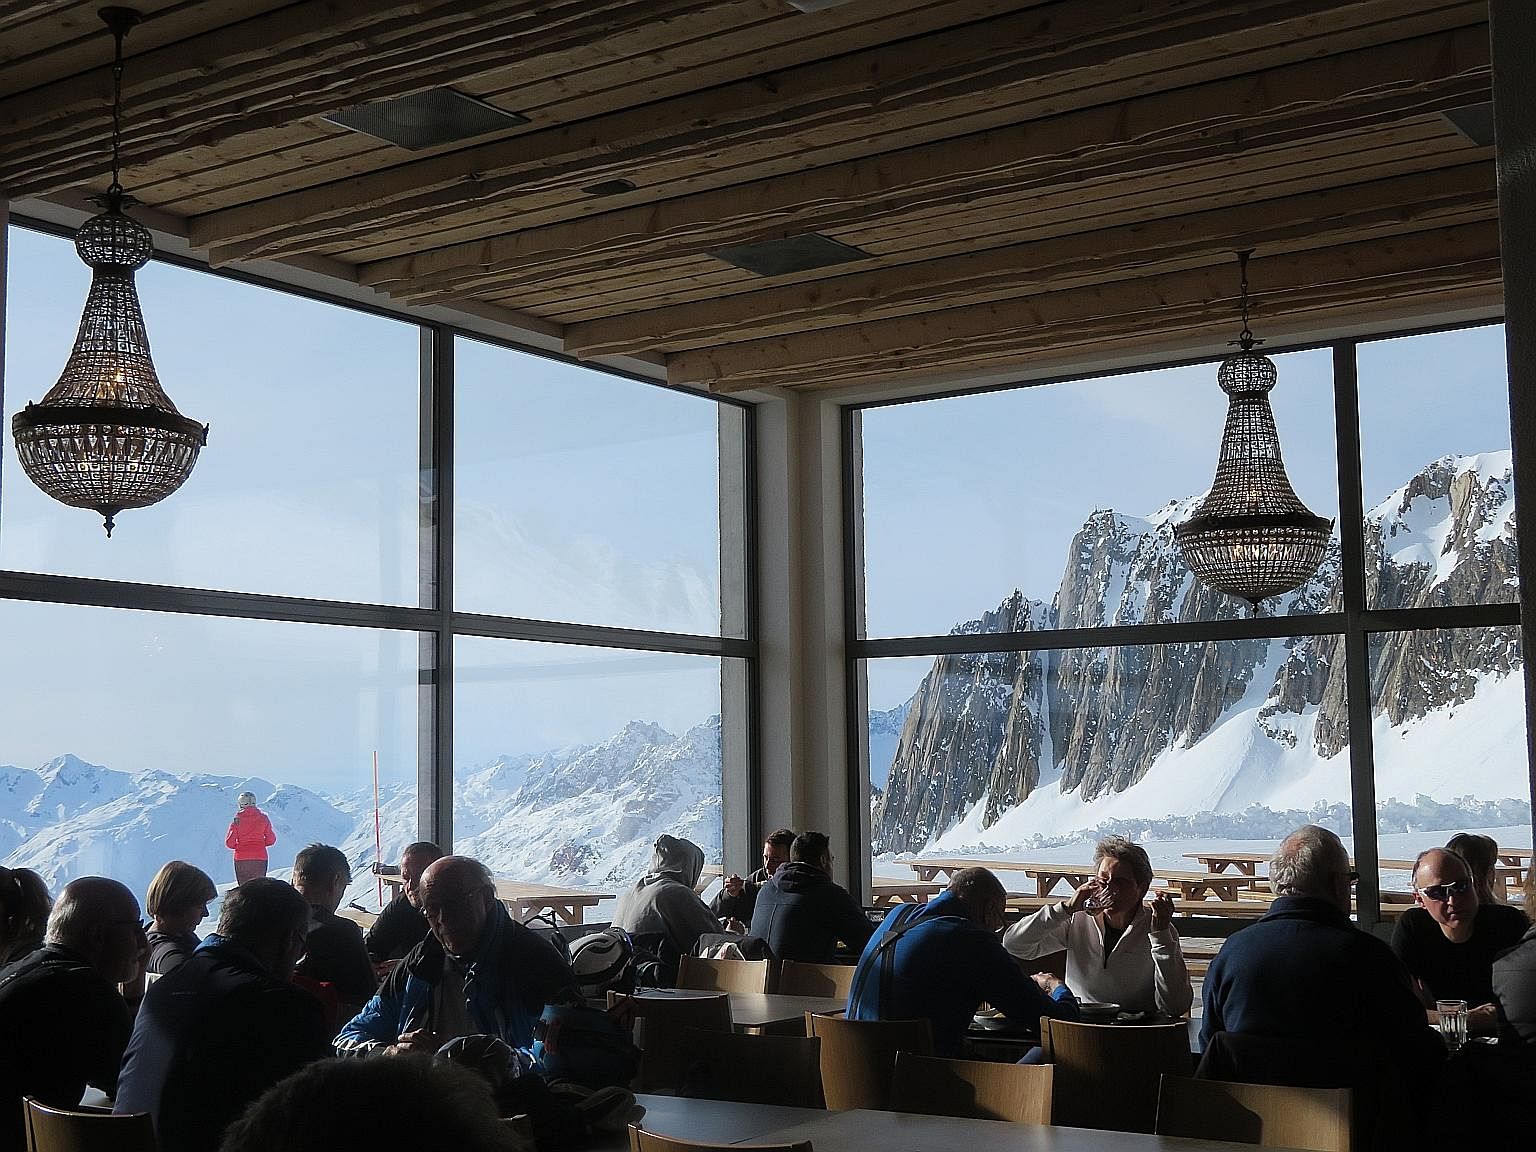 An eatery at Schneehuenerstock, where visitors can dine with a view of the sprawling Swiss Alps outside.